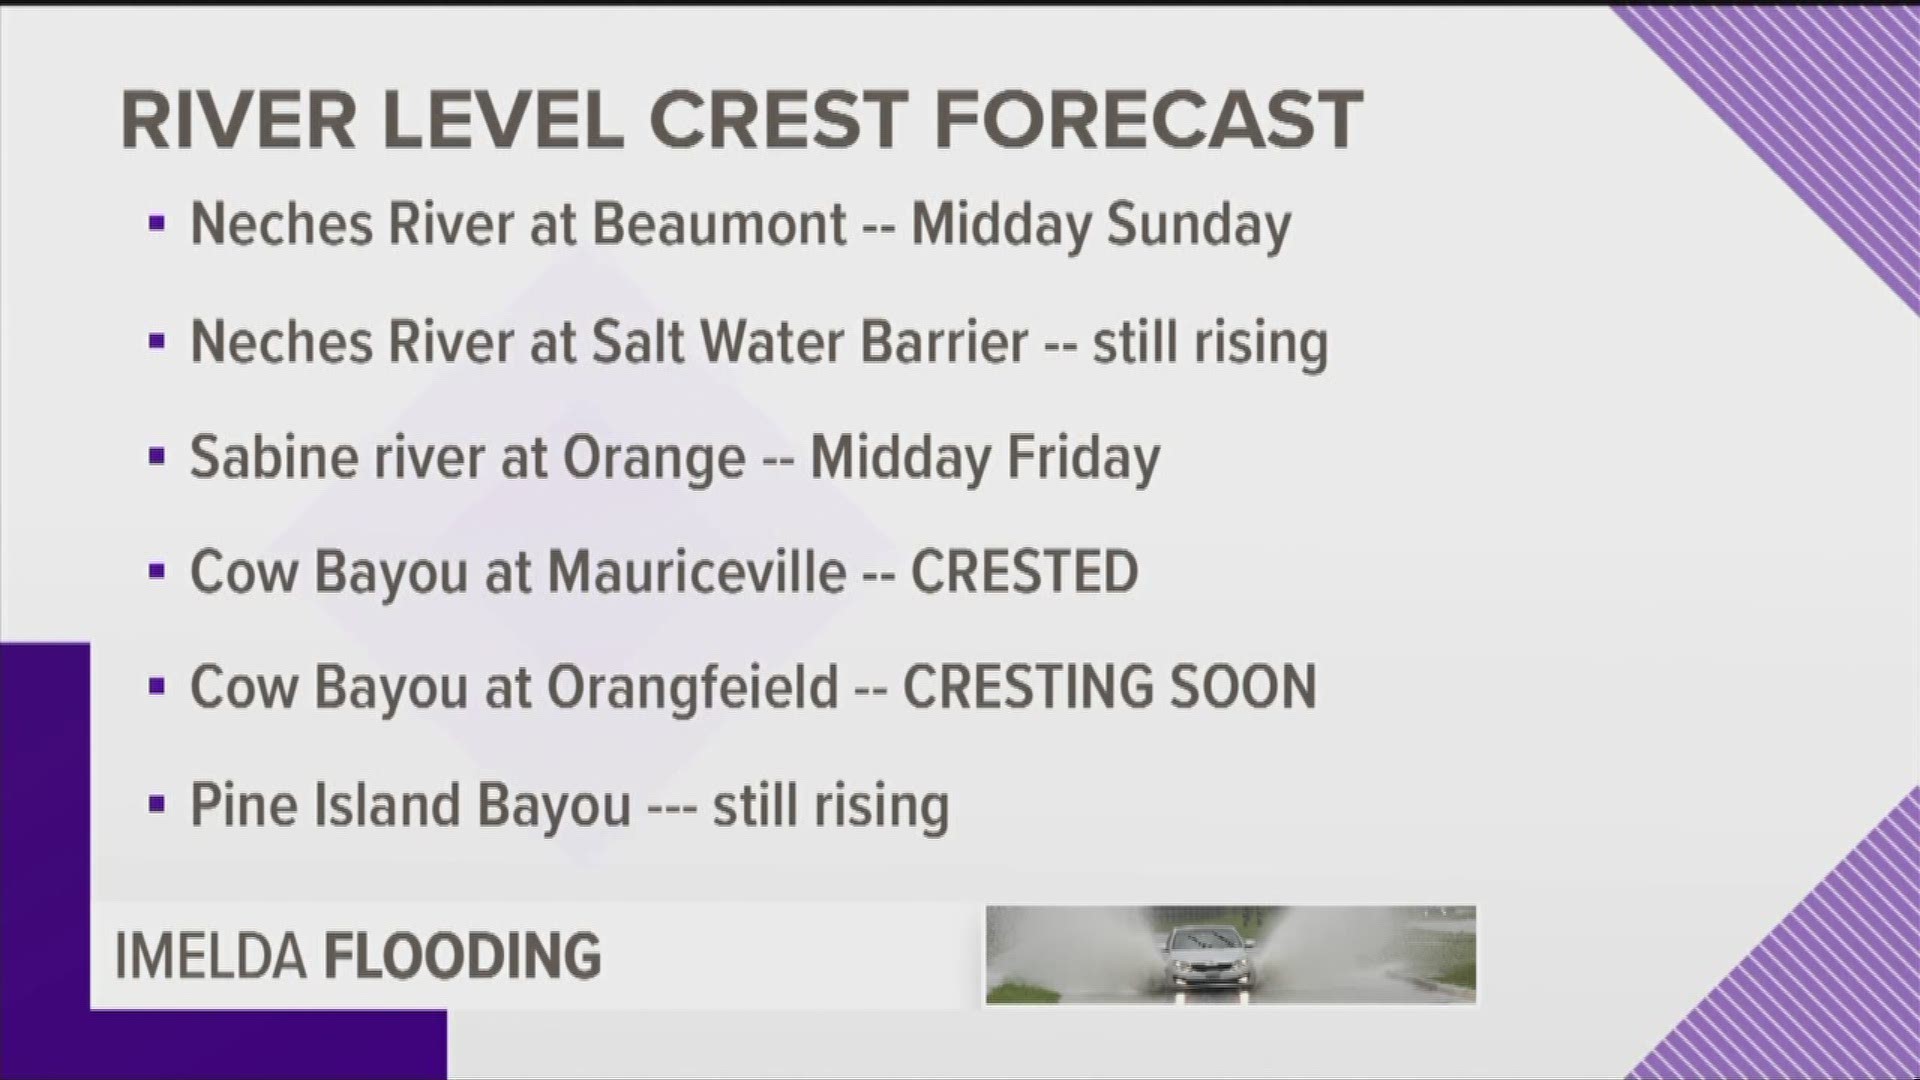 We're tracking river levels around the region in the aftermath of Imelda flooding.